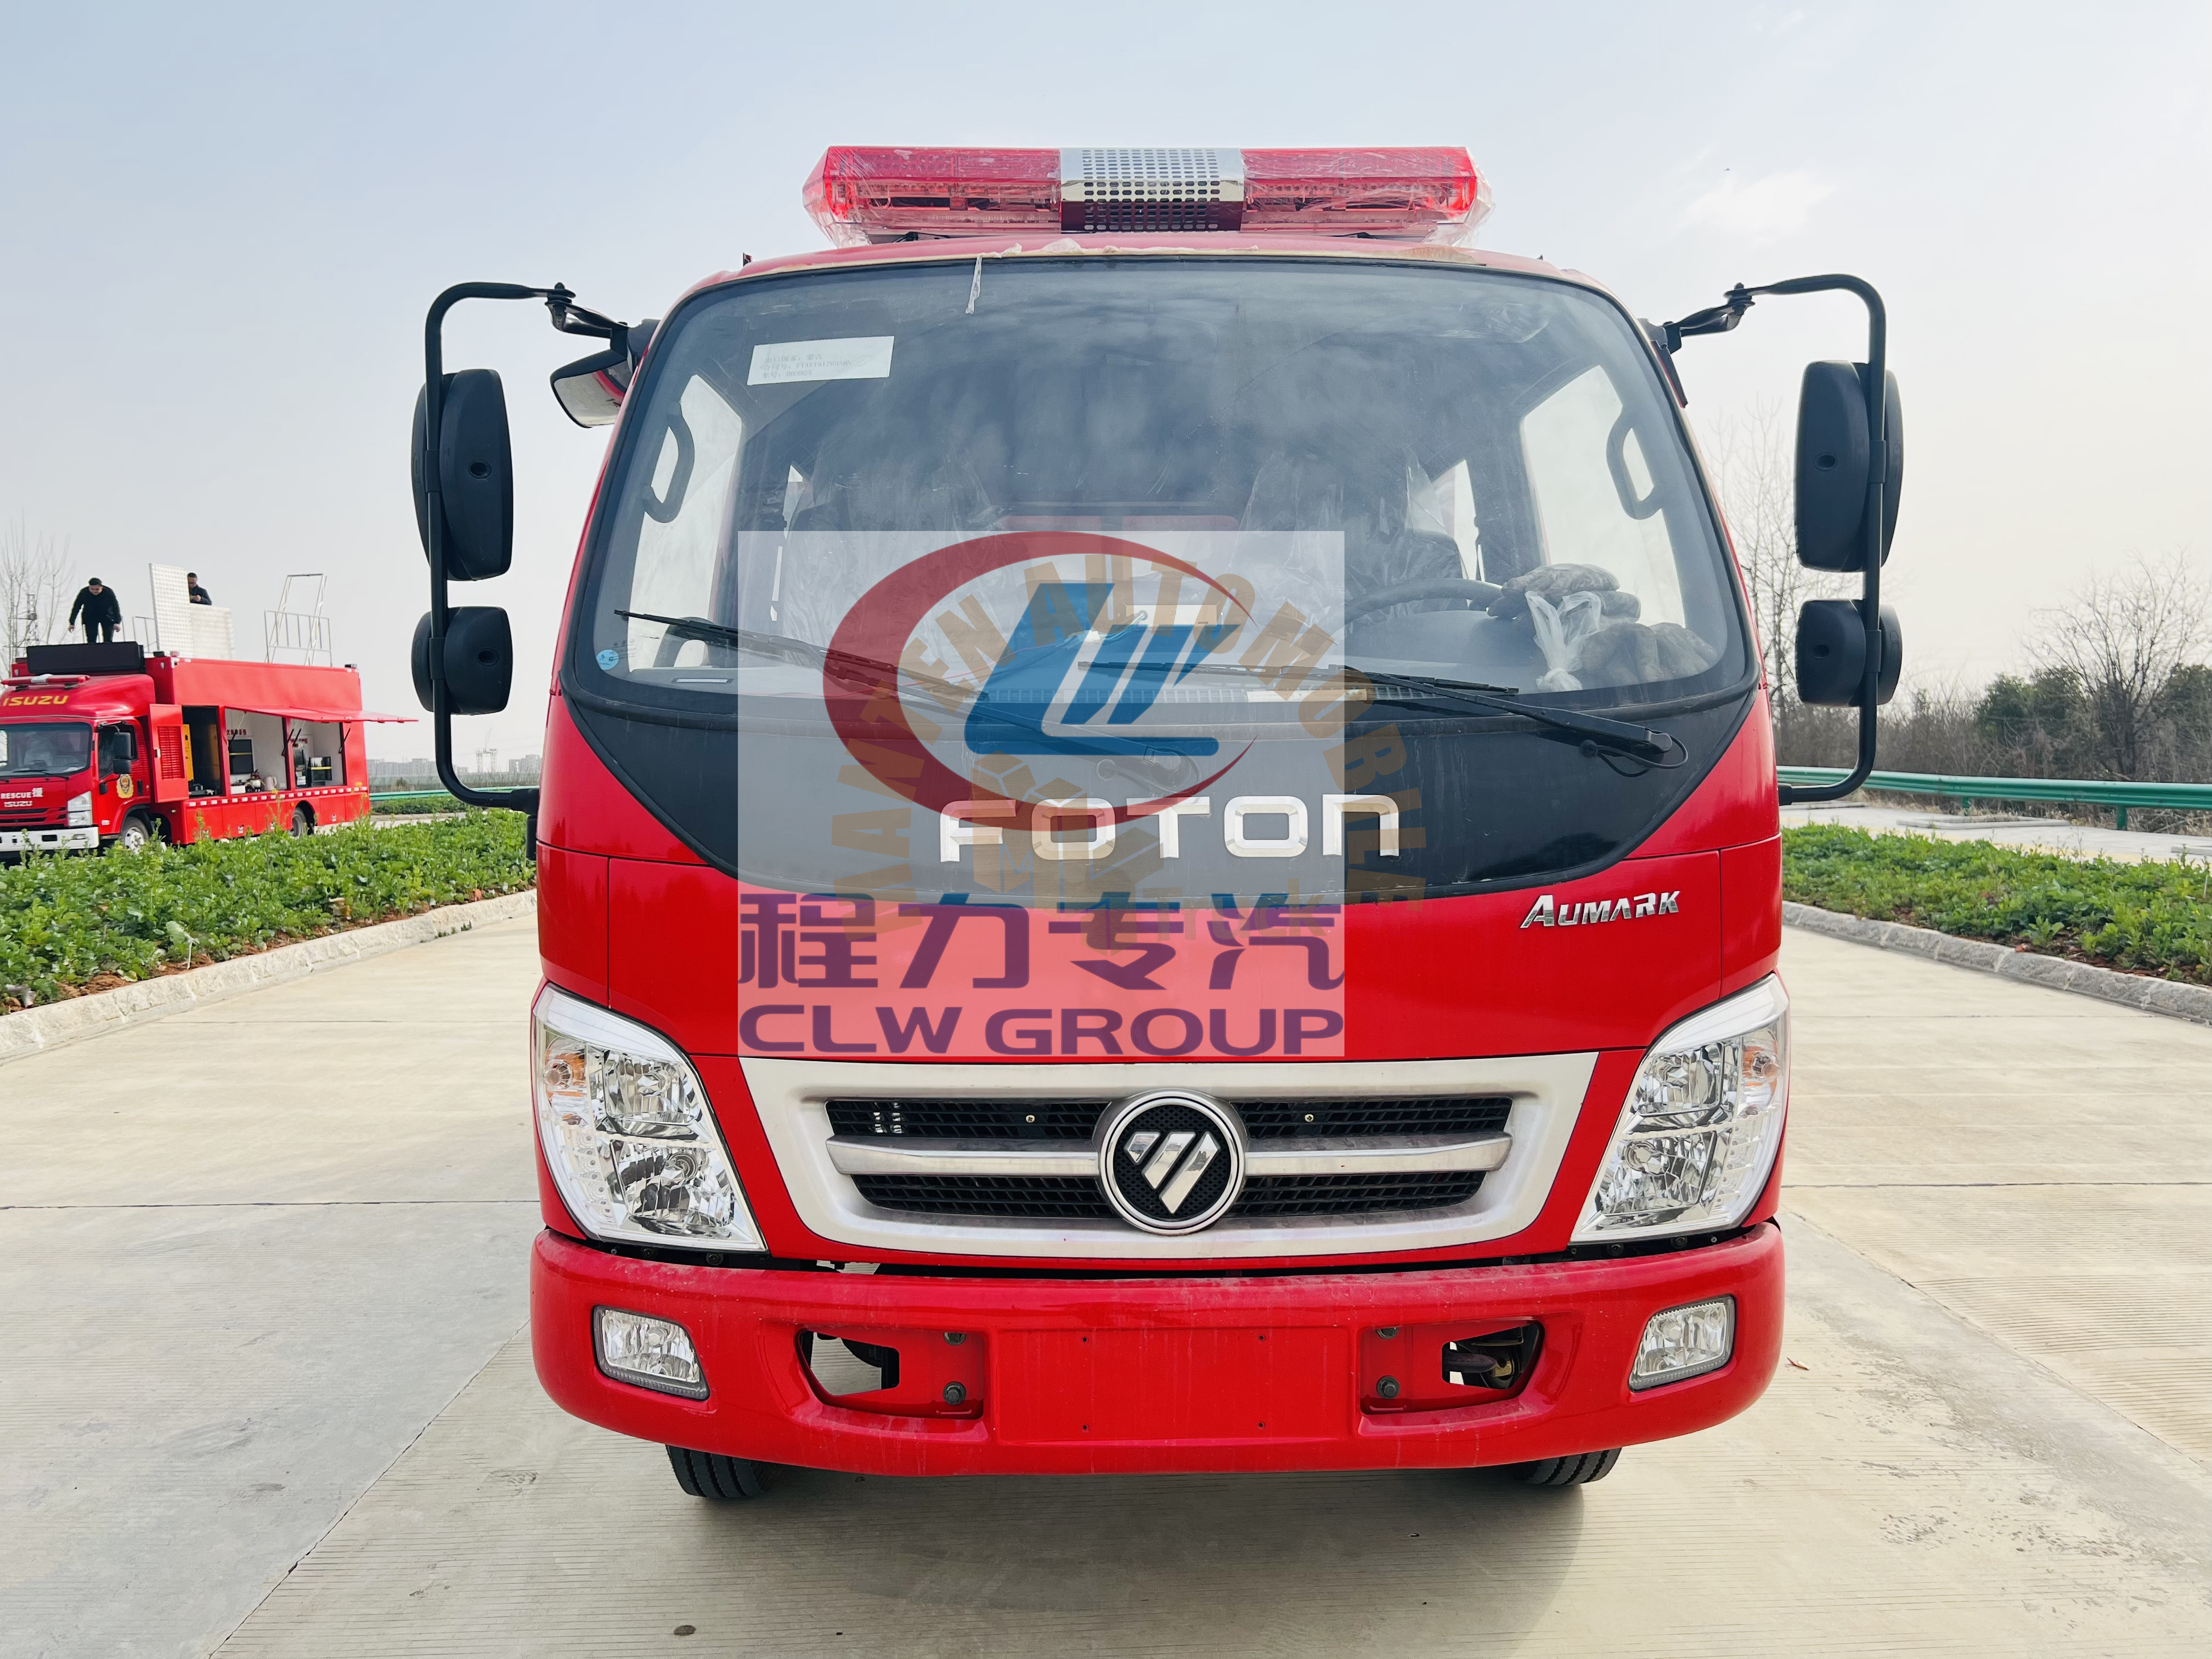 FOTON 1 tons 10 000kg 2.5 cbm 2500L Water Tank Fire Flighting Truck with fire engine and cargo box